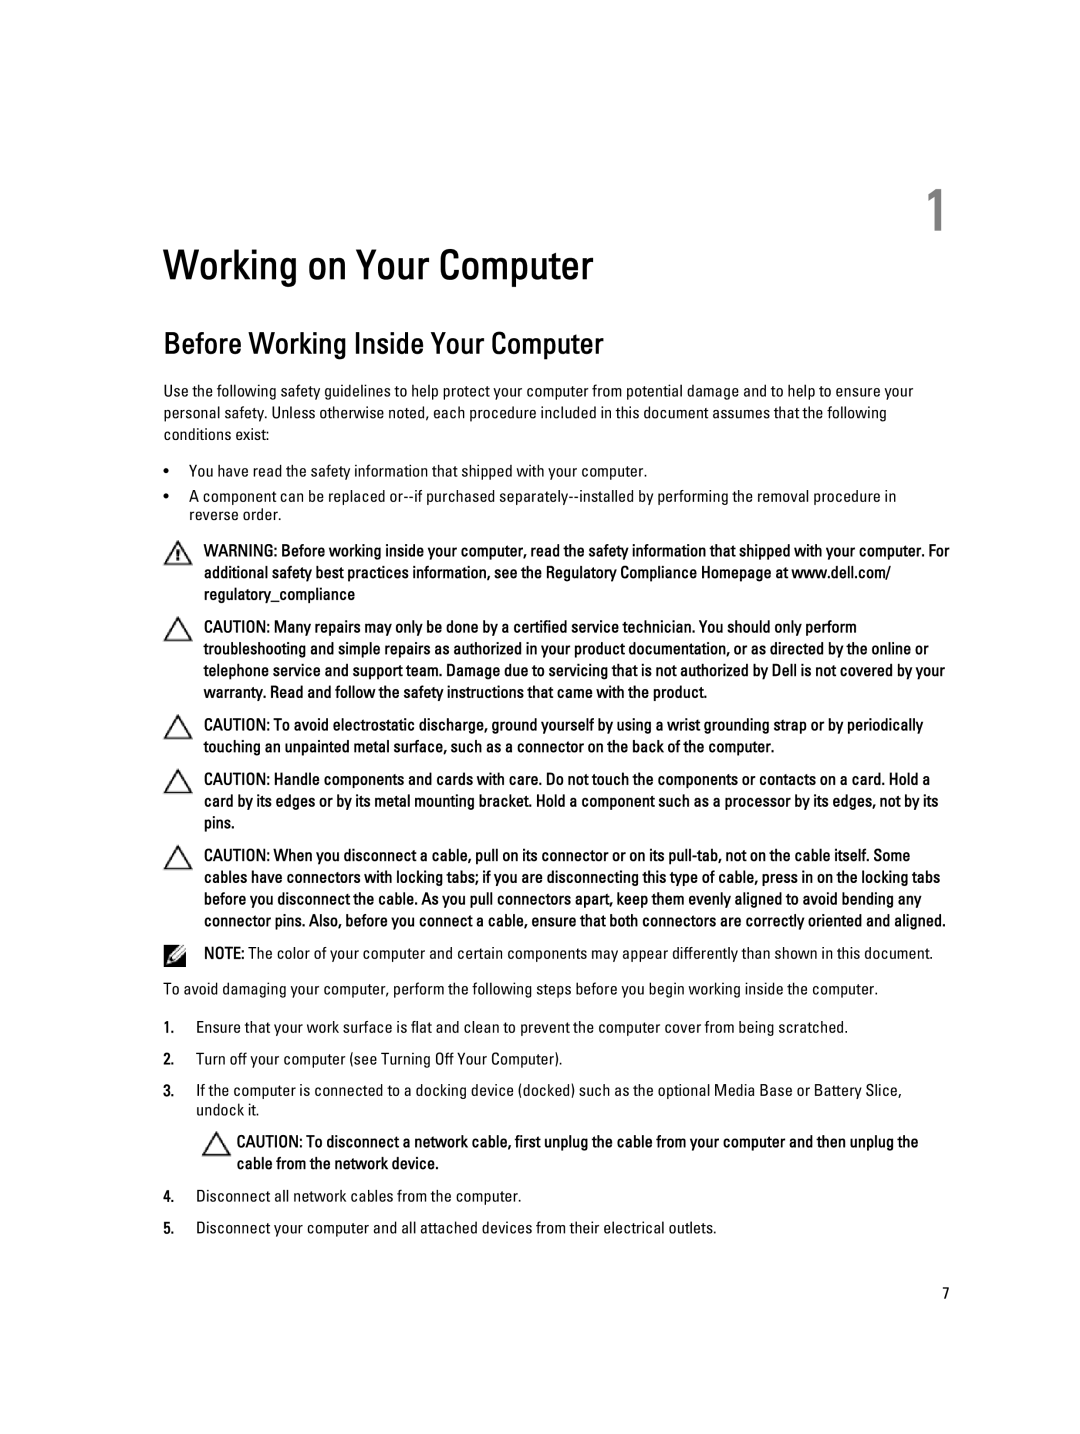 Dell E6230 owner manual Working on Your Computer, Before Working Inside Your Computer 